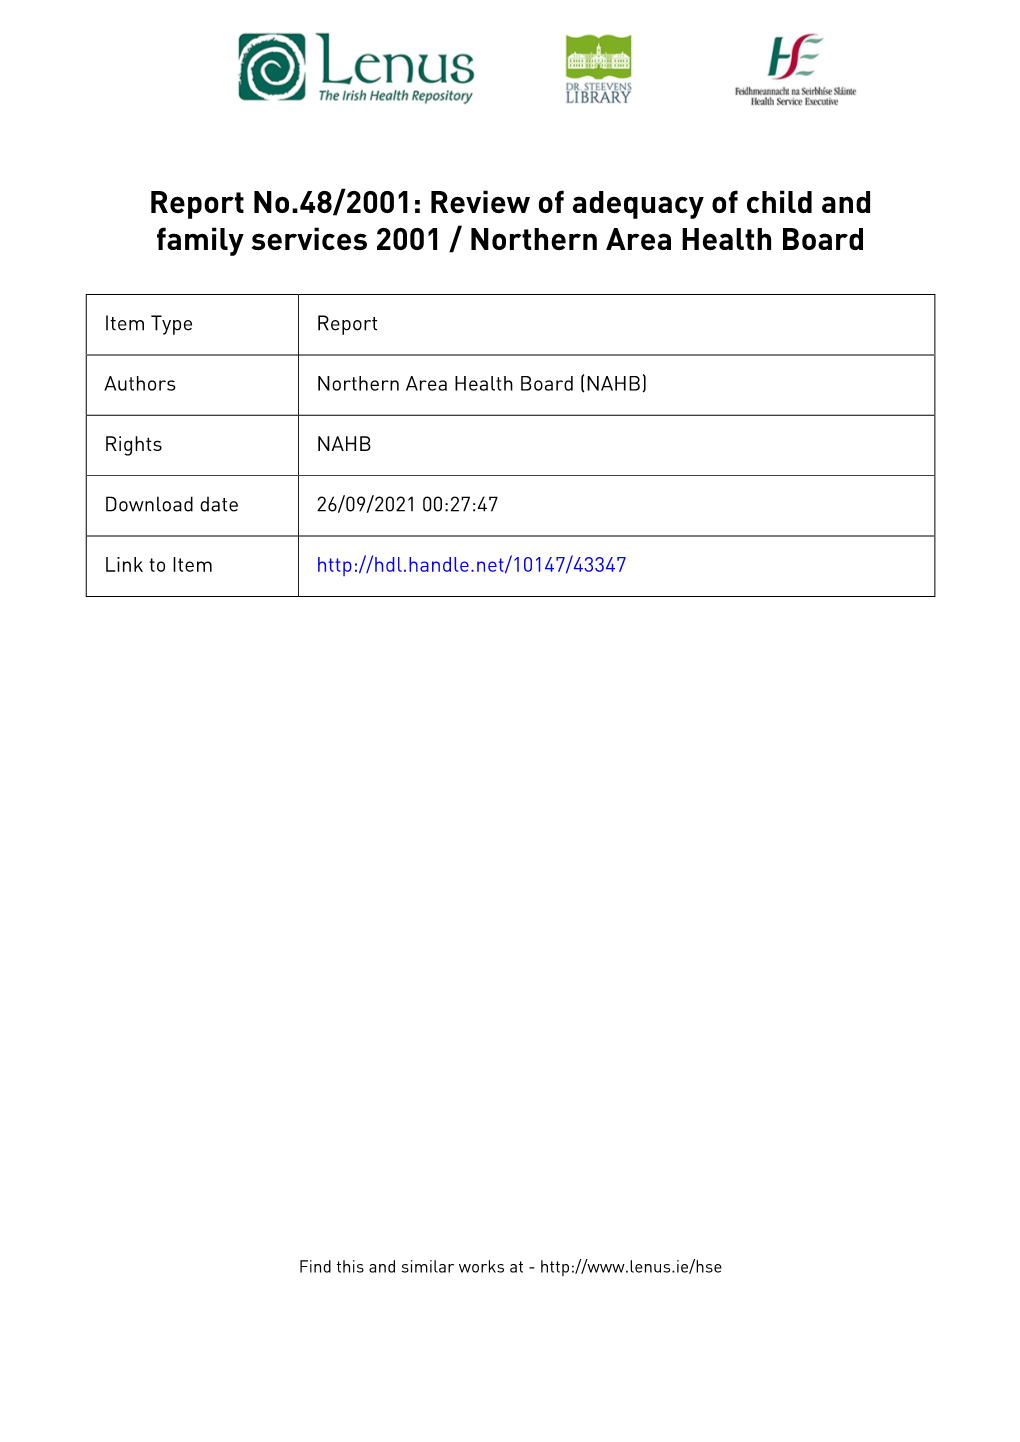 Review of Adequacy of Child and Family Services 2001 / Northern Area Health Board